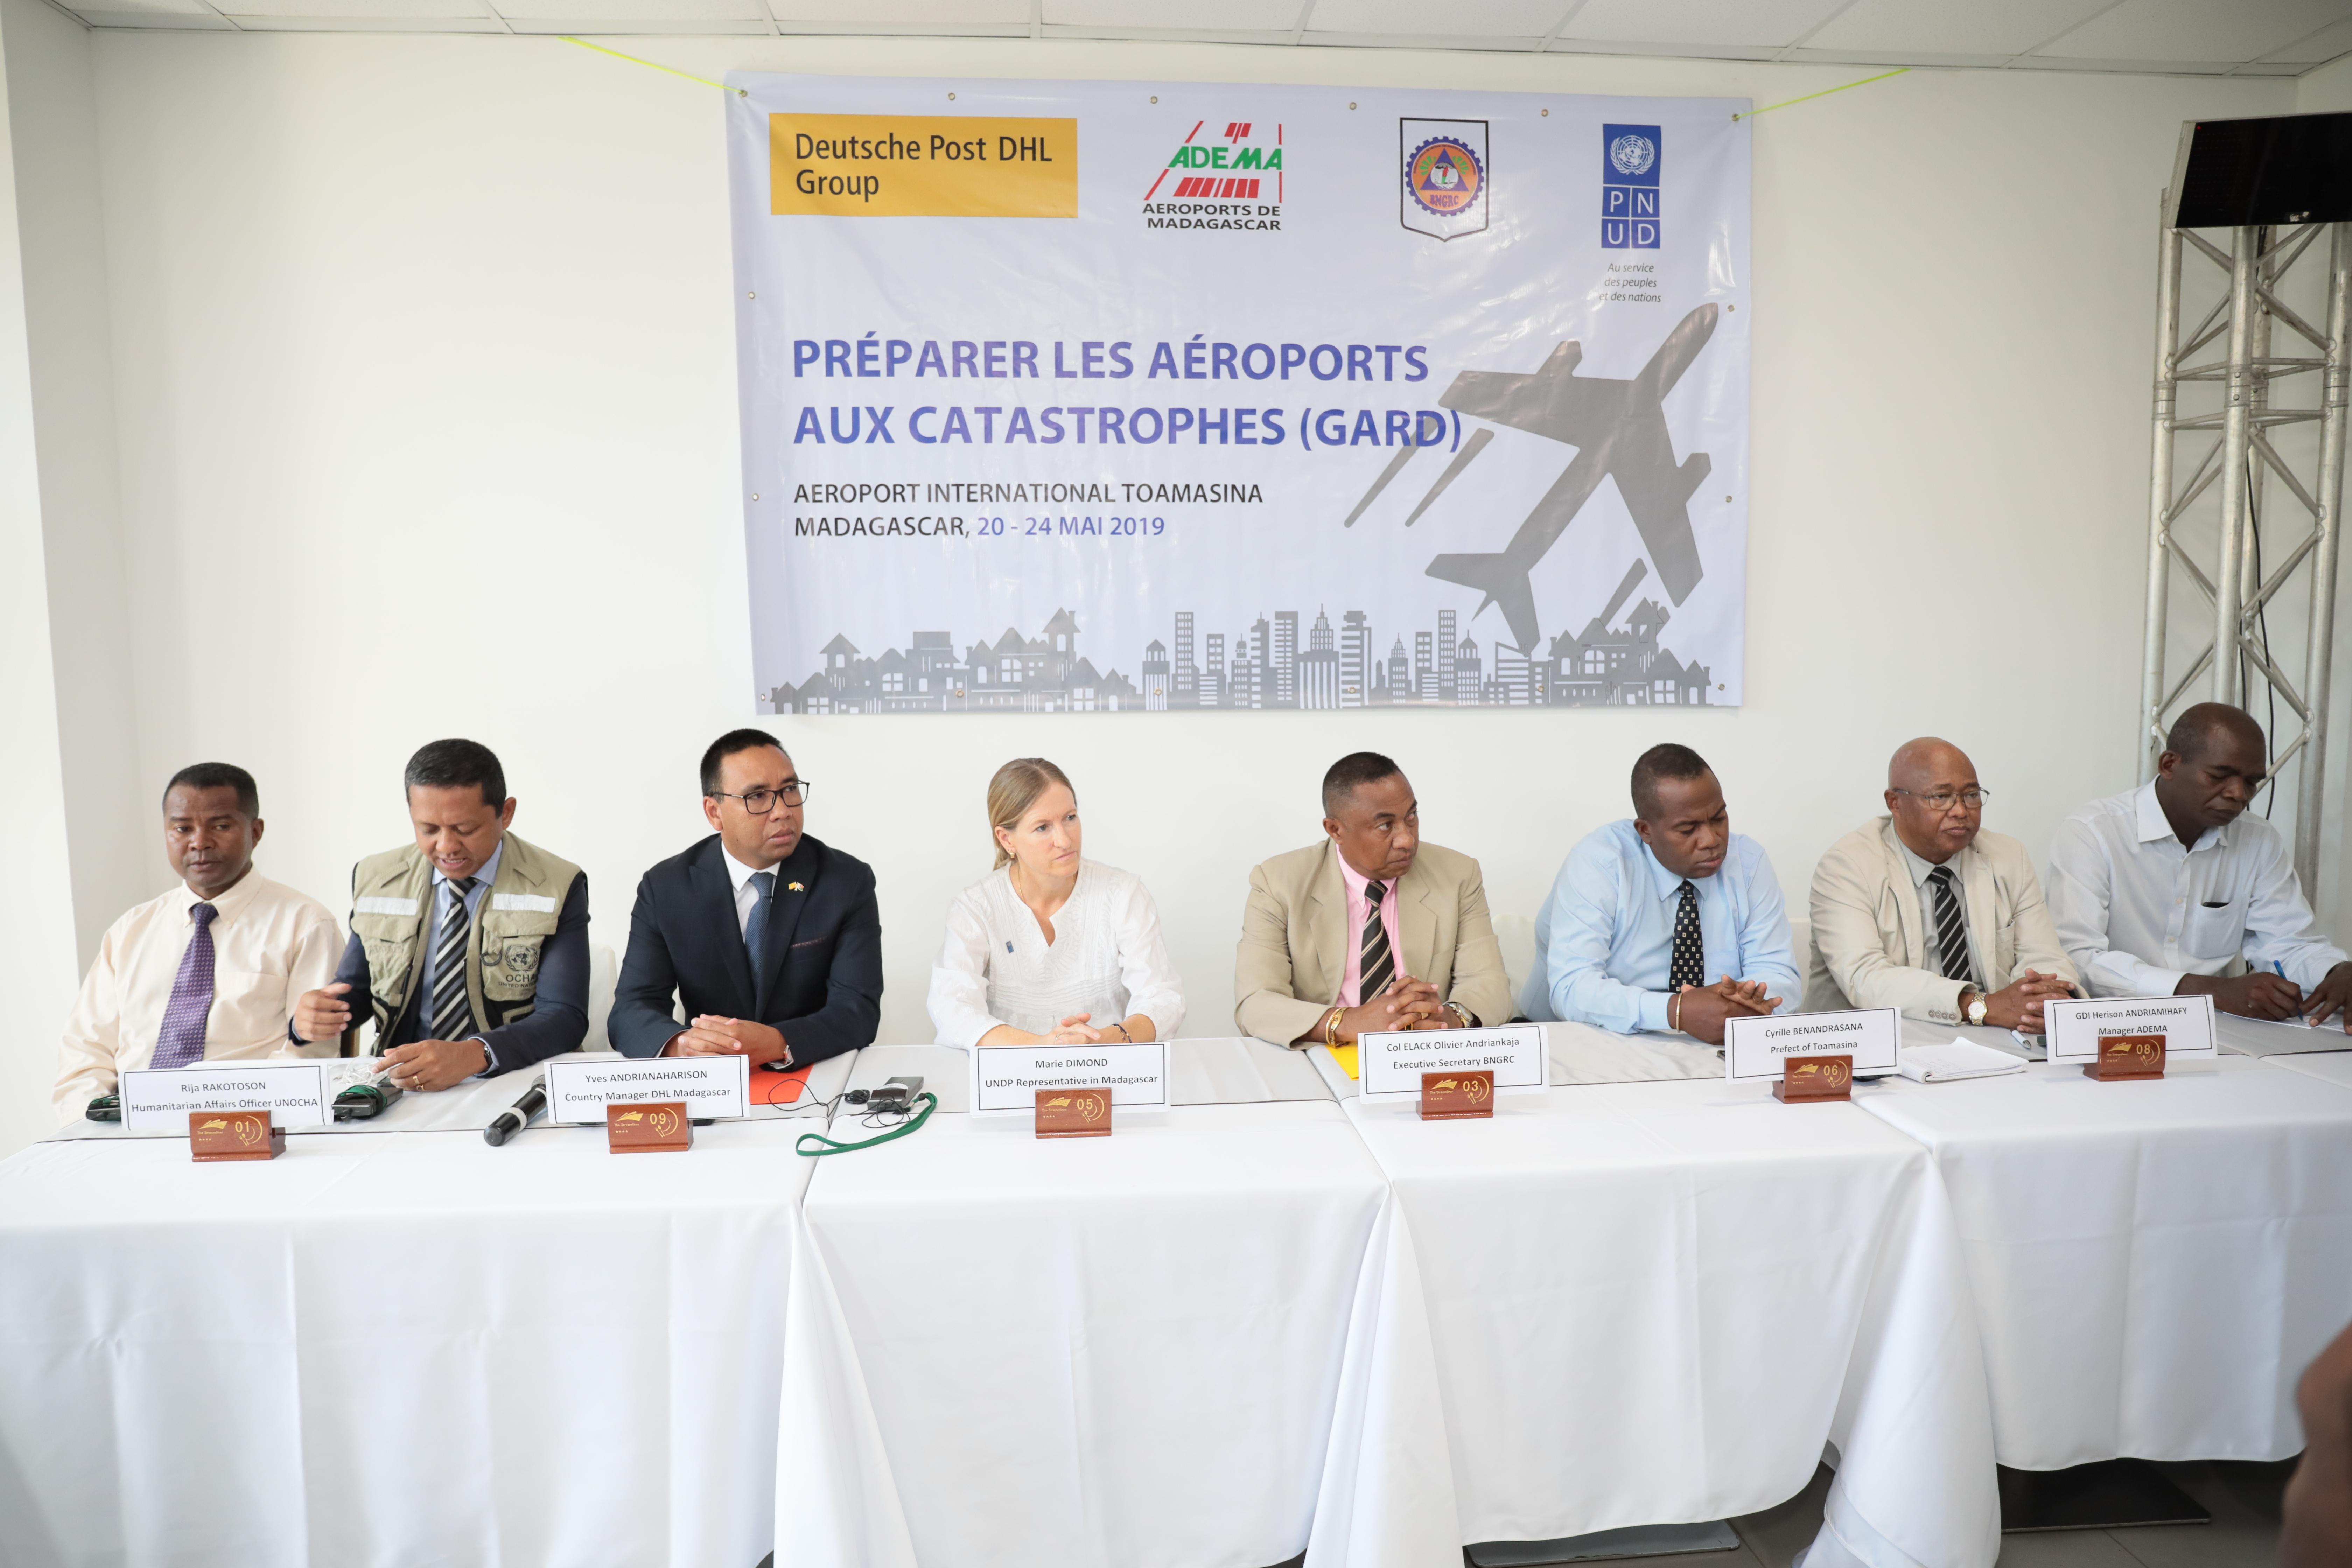 DHL Group, UNDP others partner to Get Airport Risk Ready in Madagascar